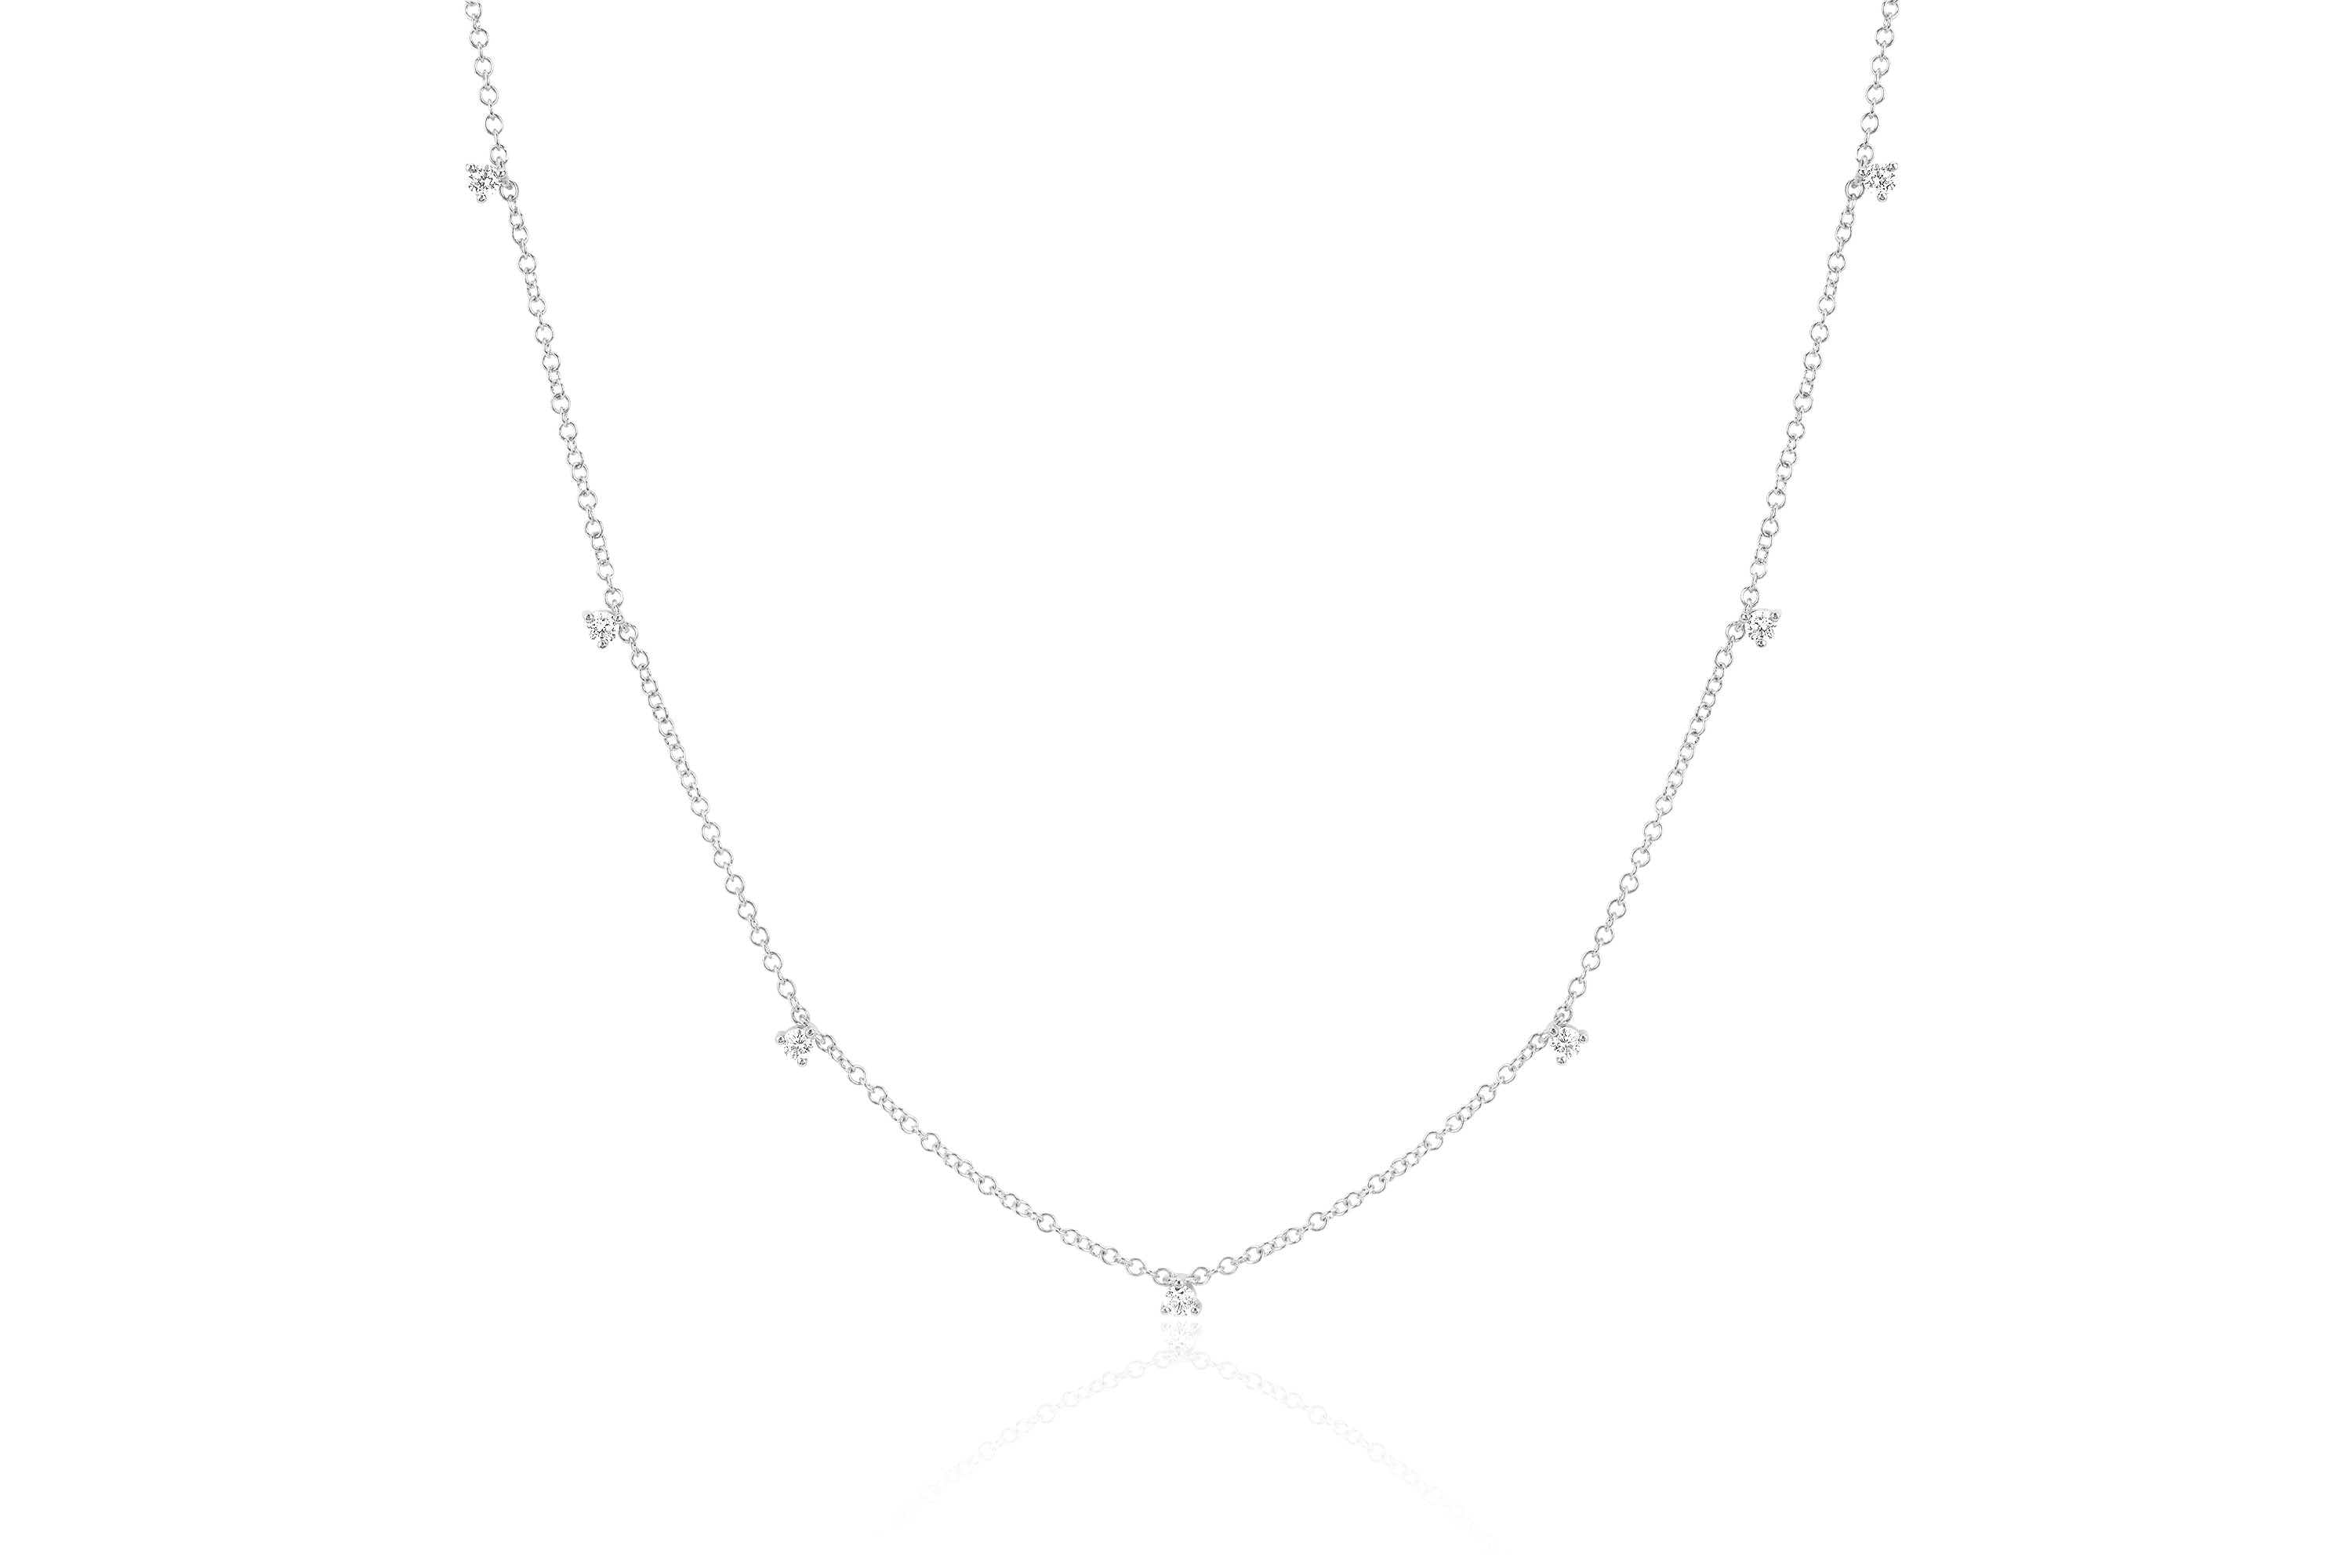 7 Prong Set Diamond Necklace in 14k white gold